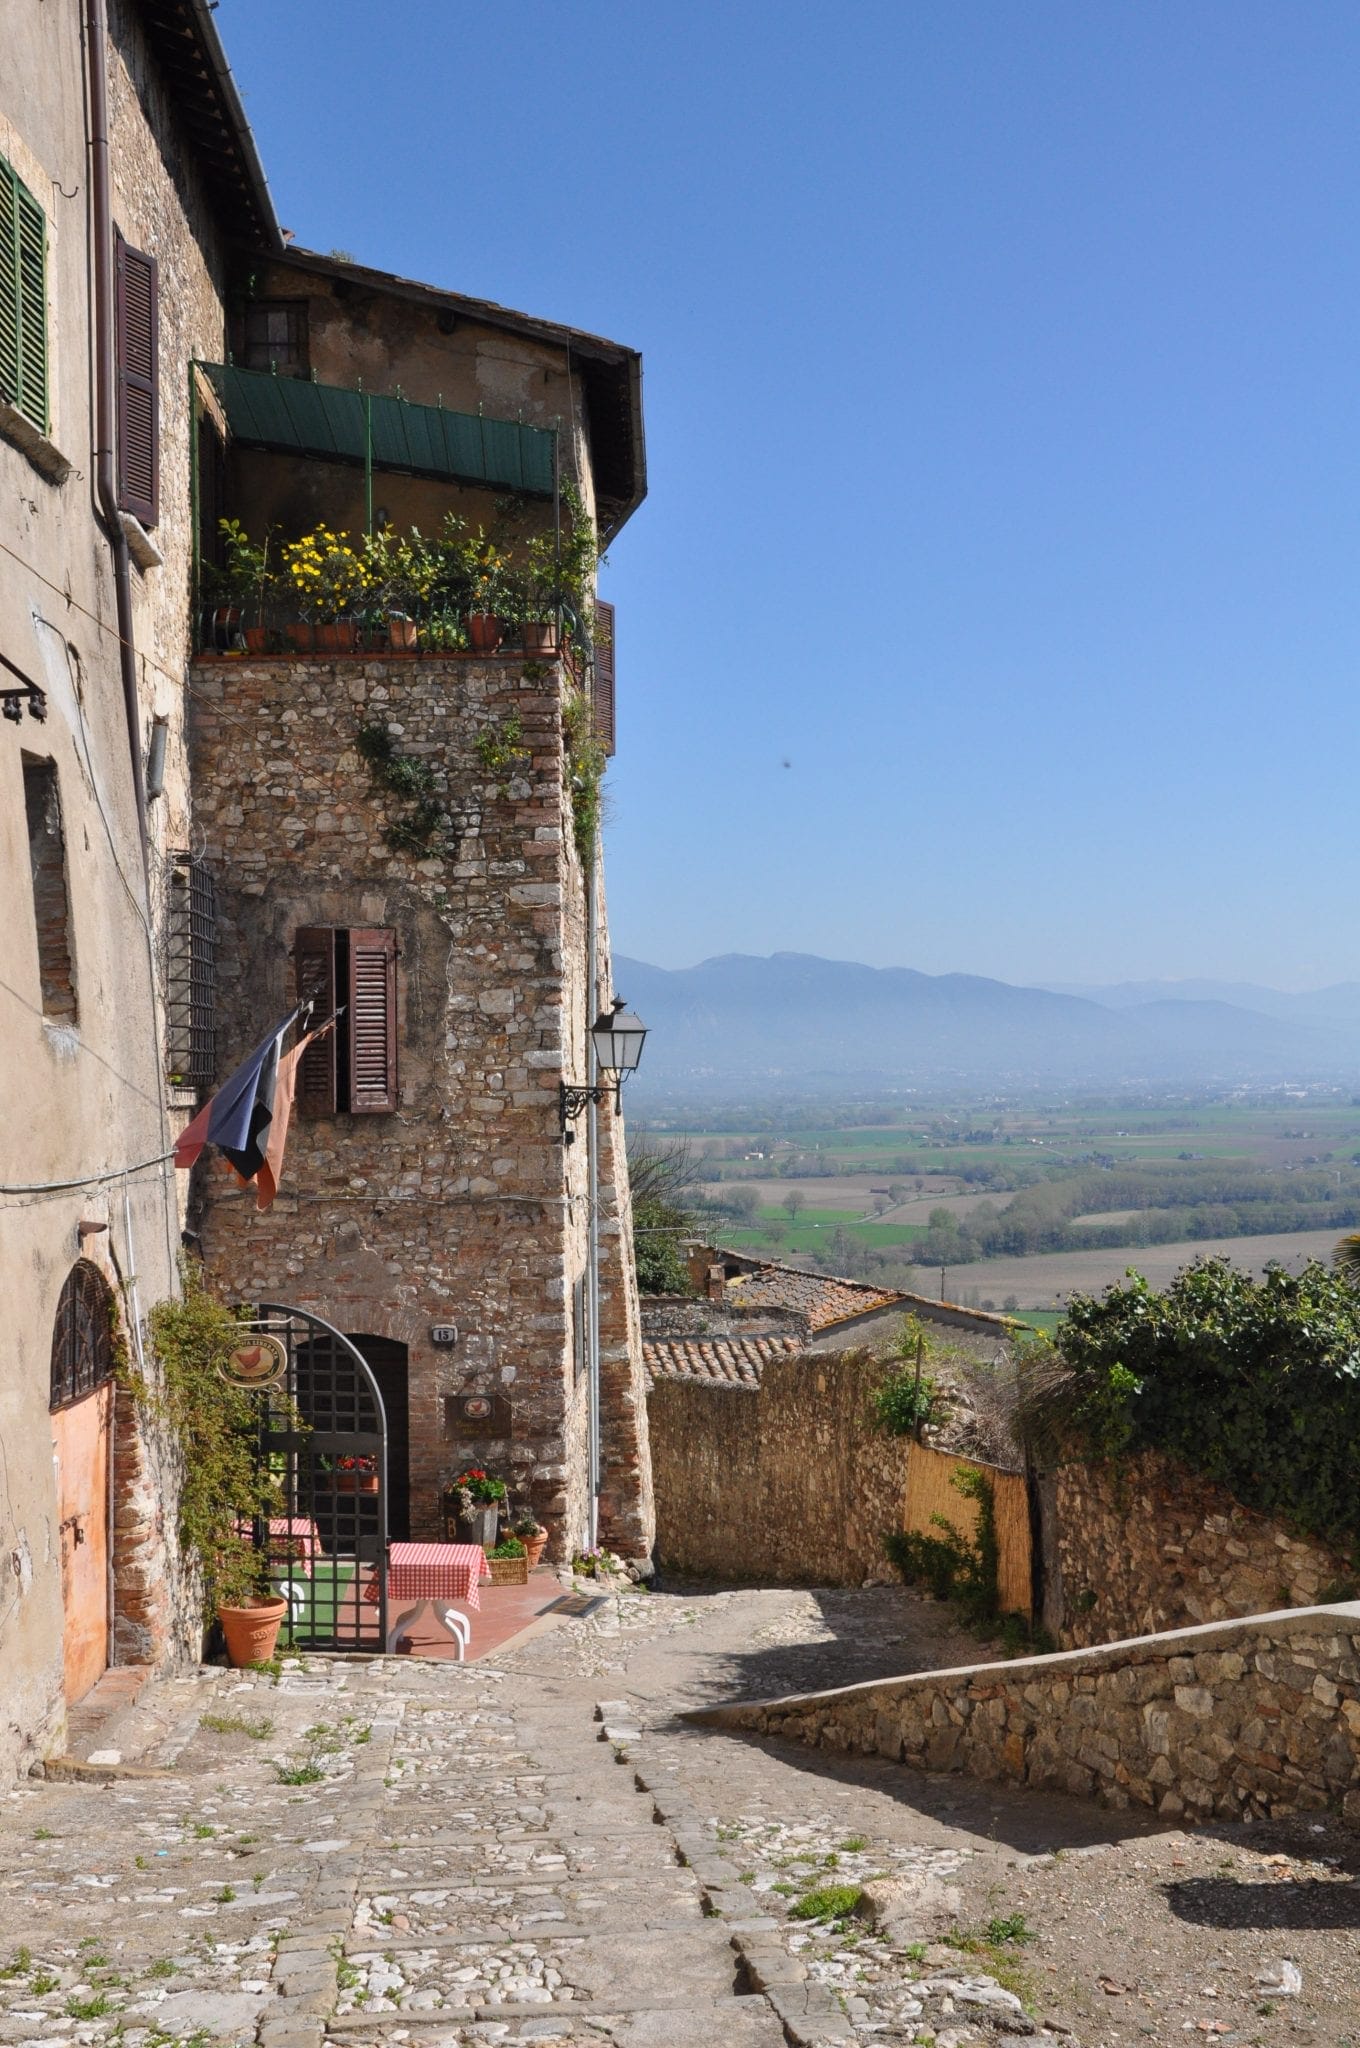 Narni, Umbria, where you have to get by bus